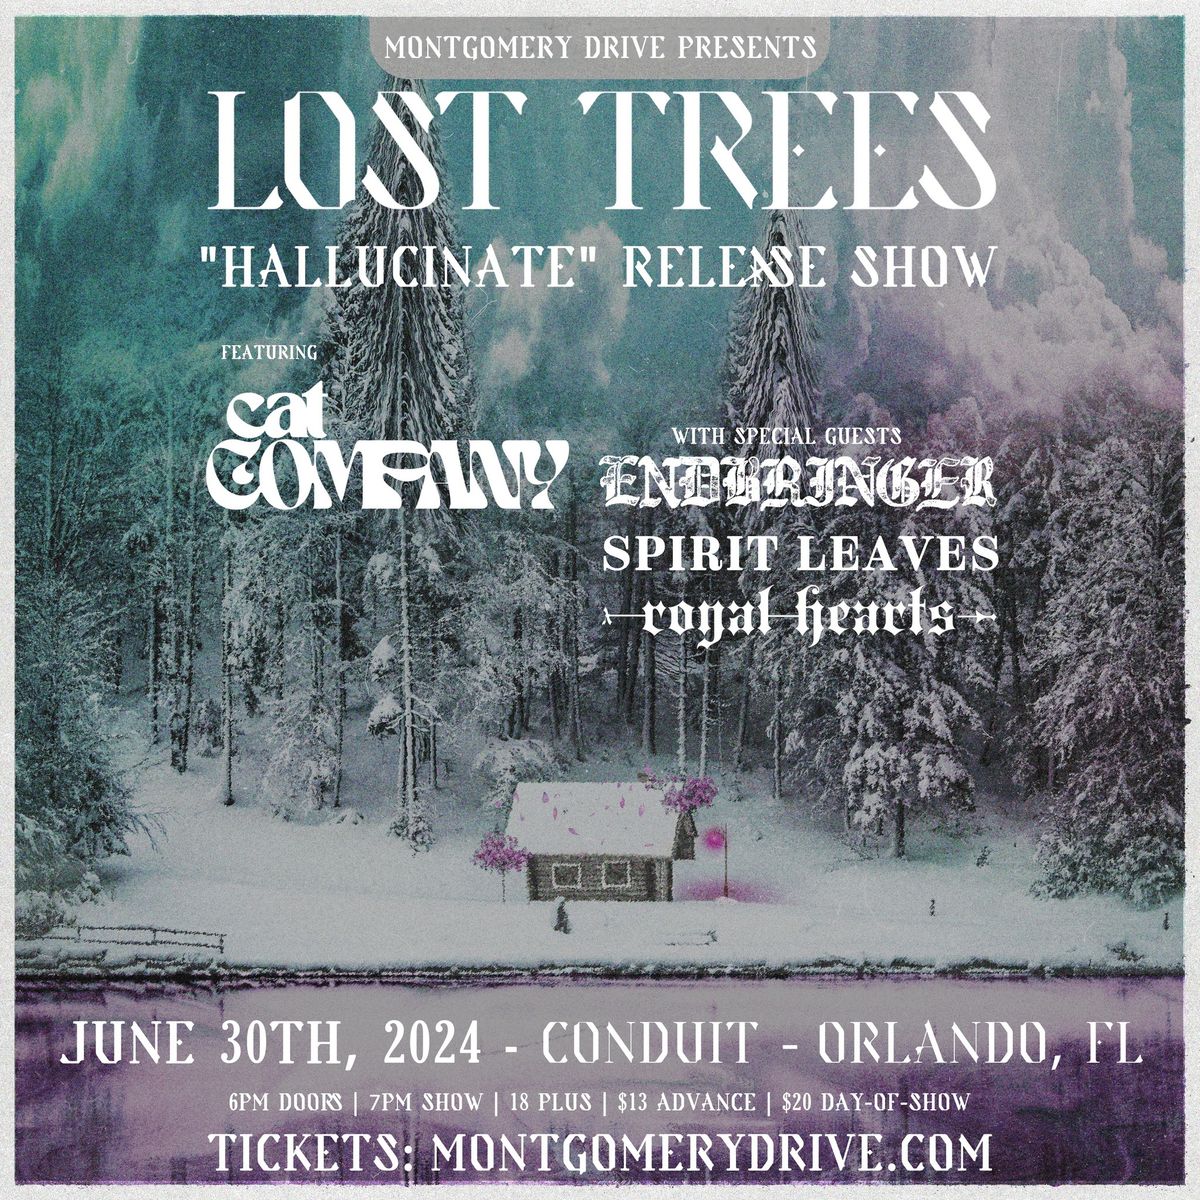 Lost Trees \u201cHallucinate\u201d Release Show ft Cat Company with Special Guests at Conduit - Orlando, FL